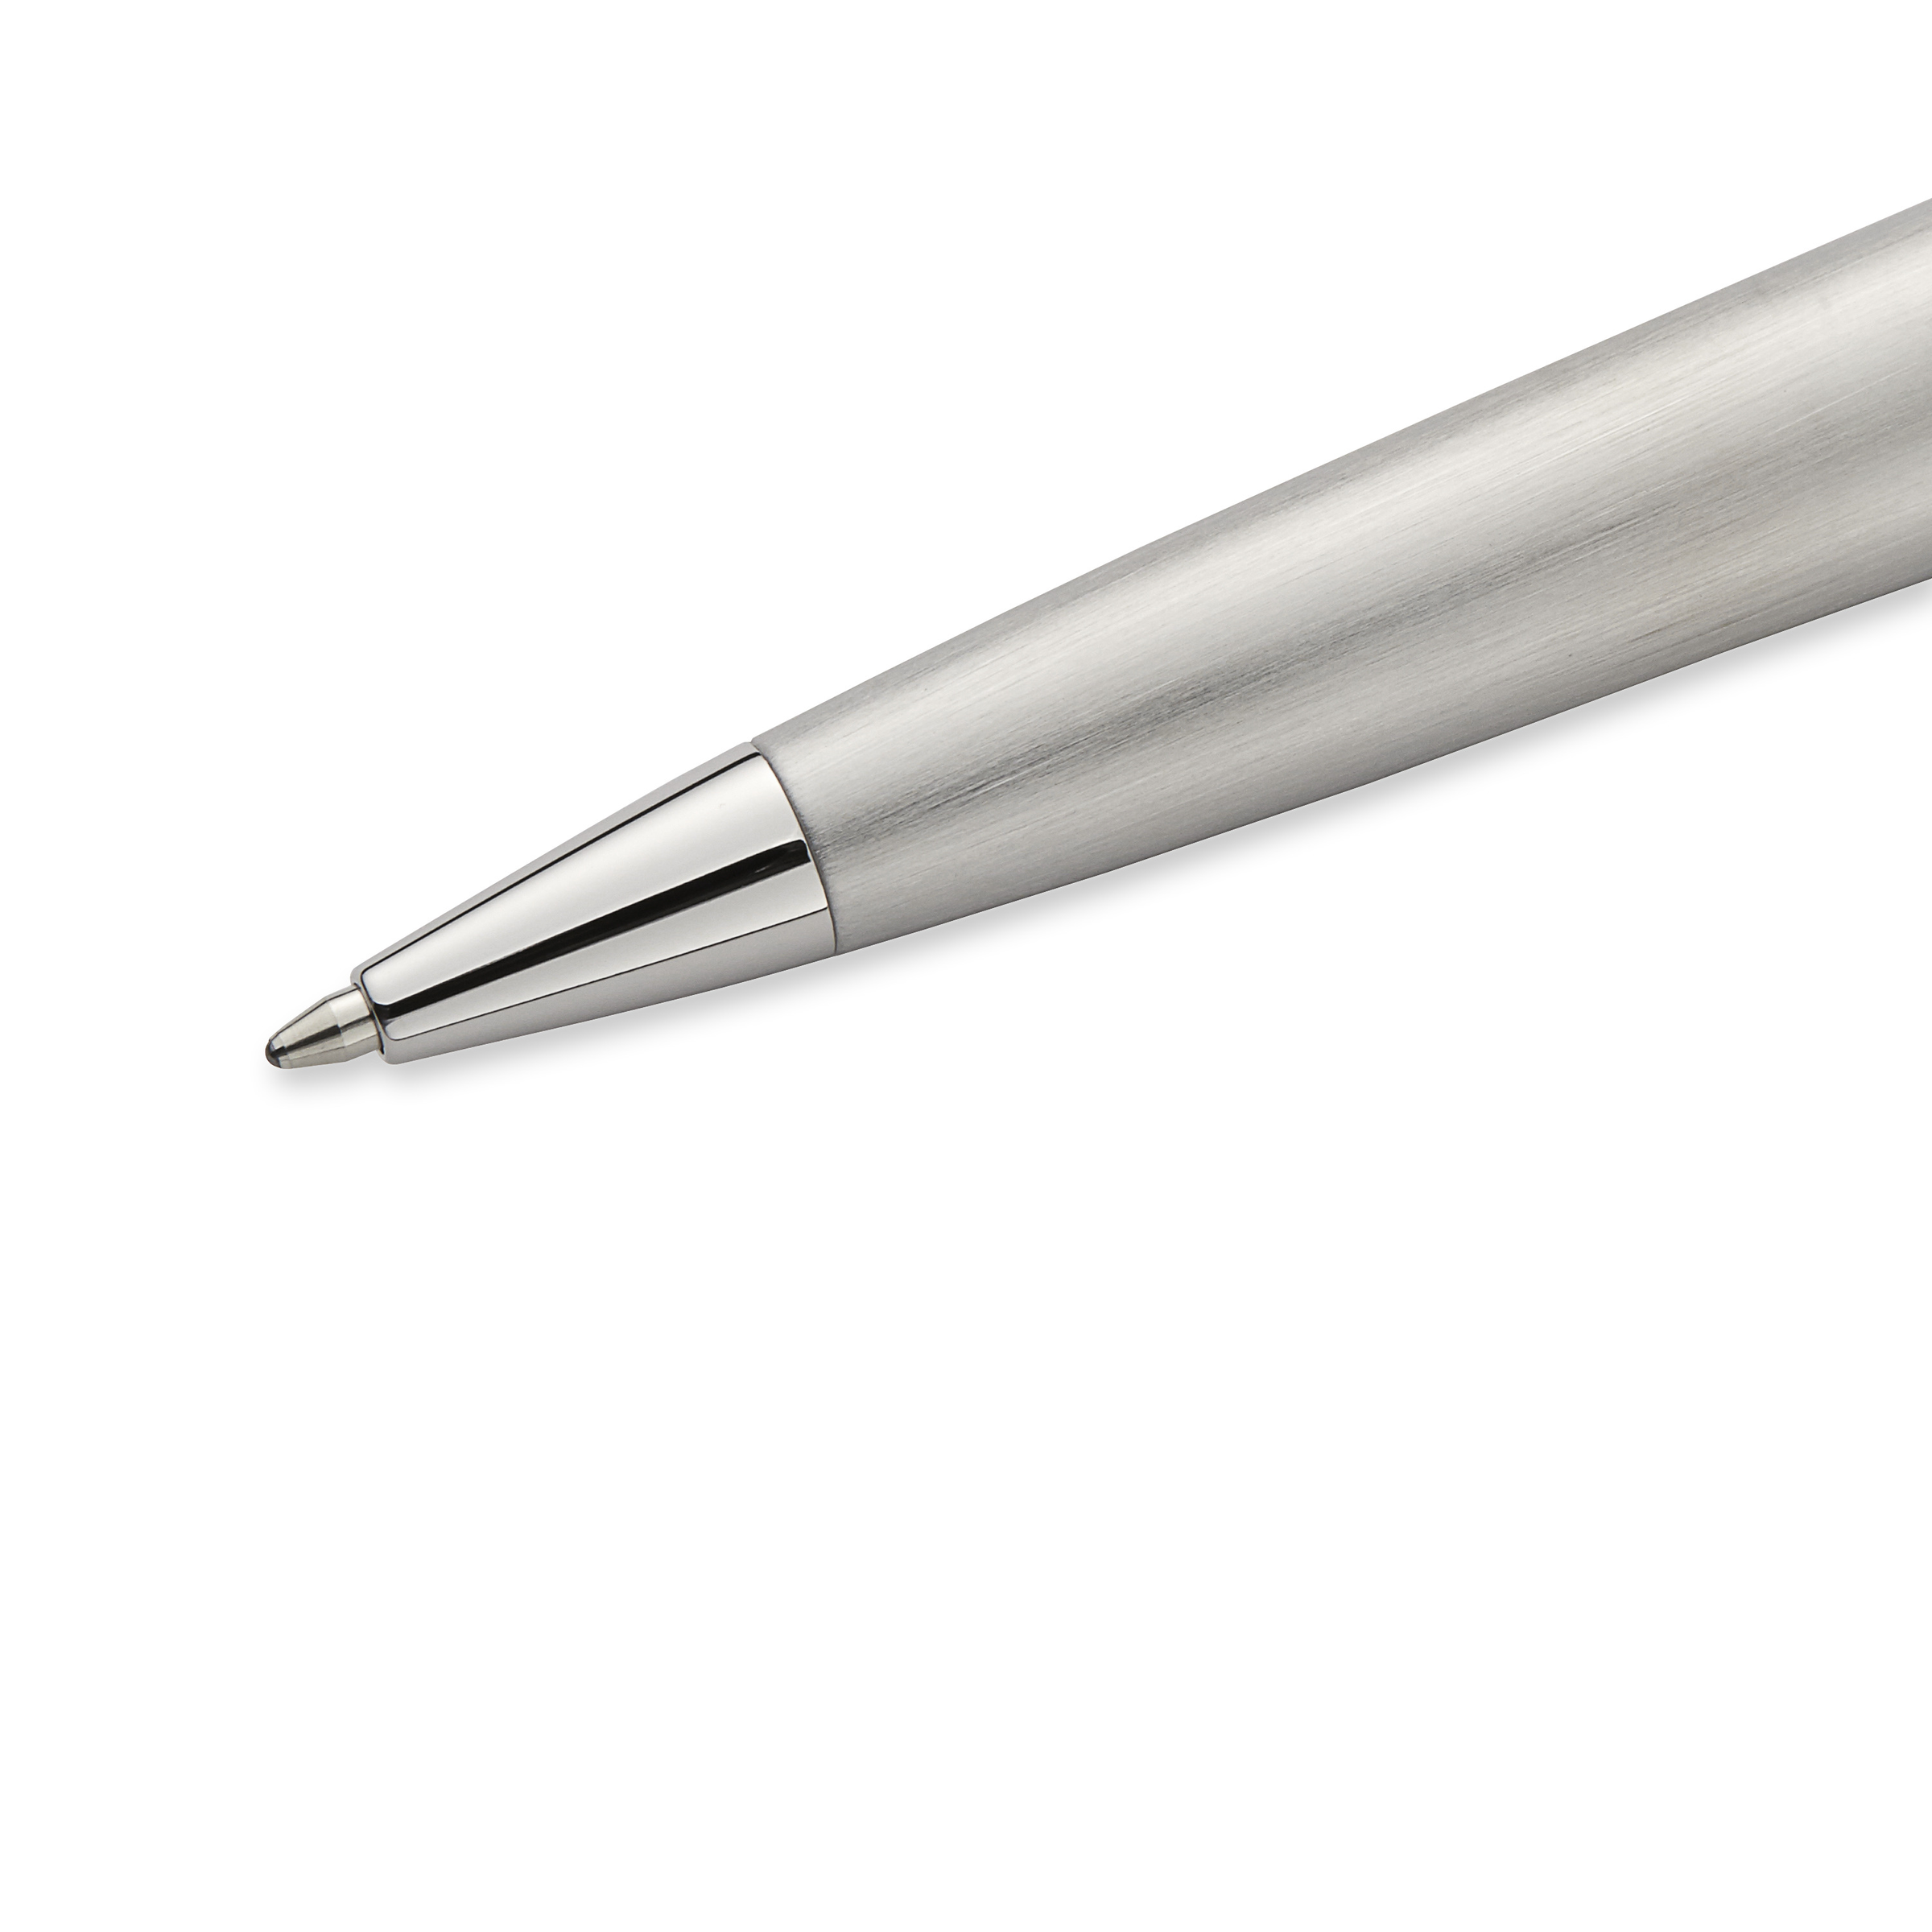 Waterman Expert Stainless Steel Chrome Trim Ballpoint - Pencraft the boutique